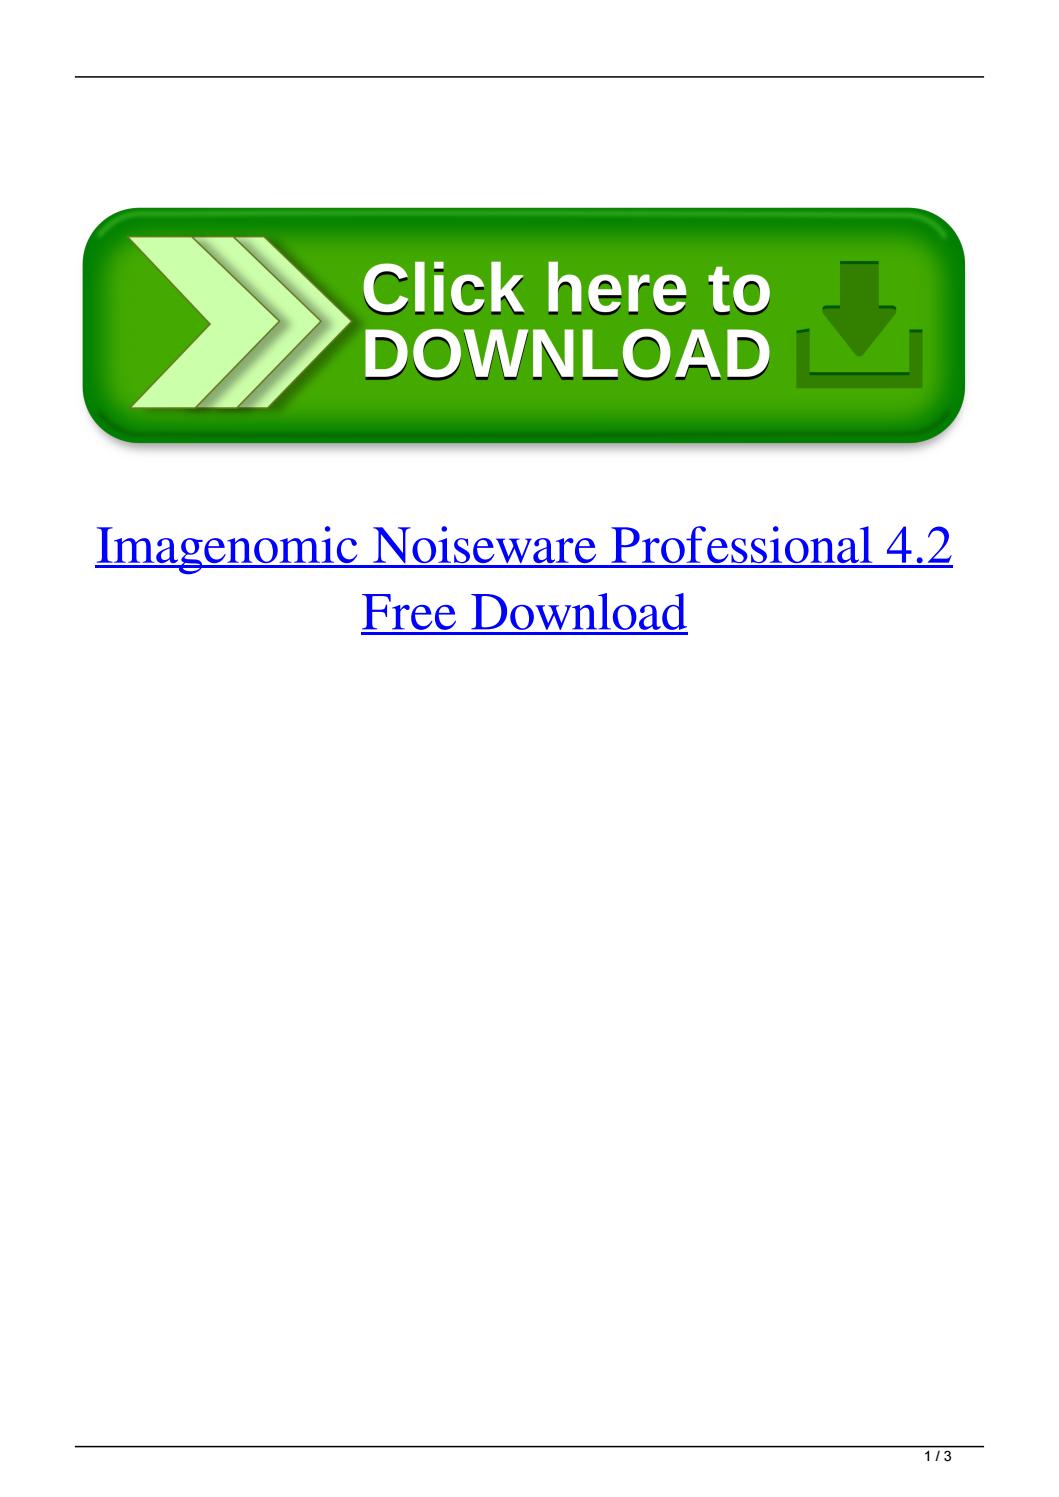 noiseware professional plug-in for photoshop free download